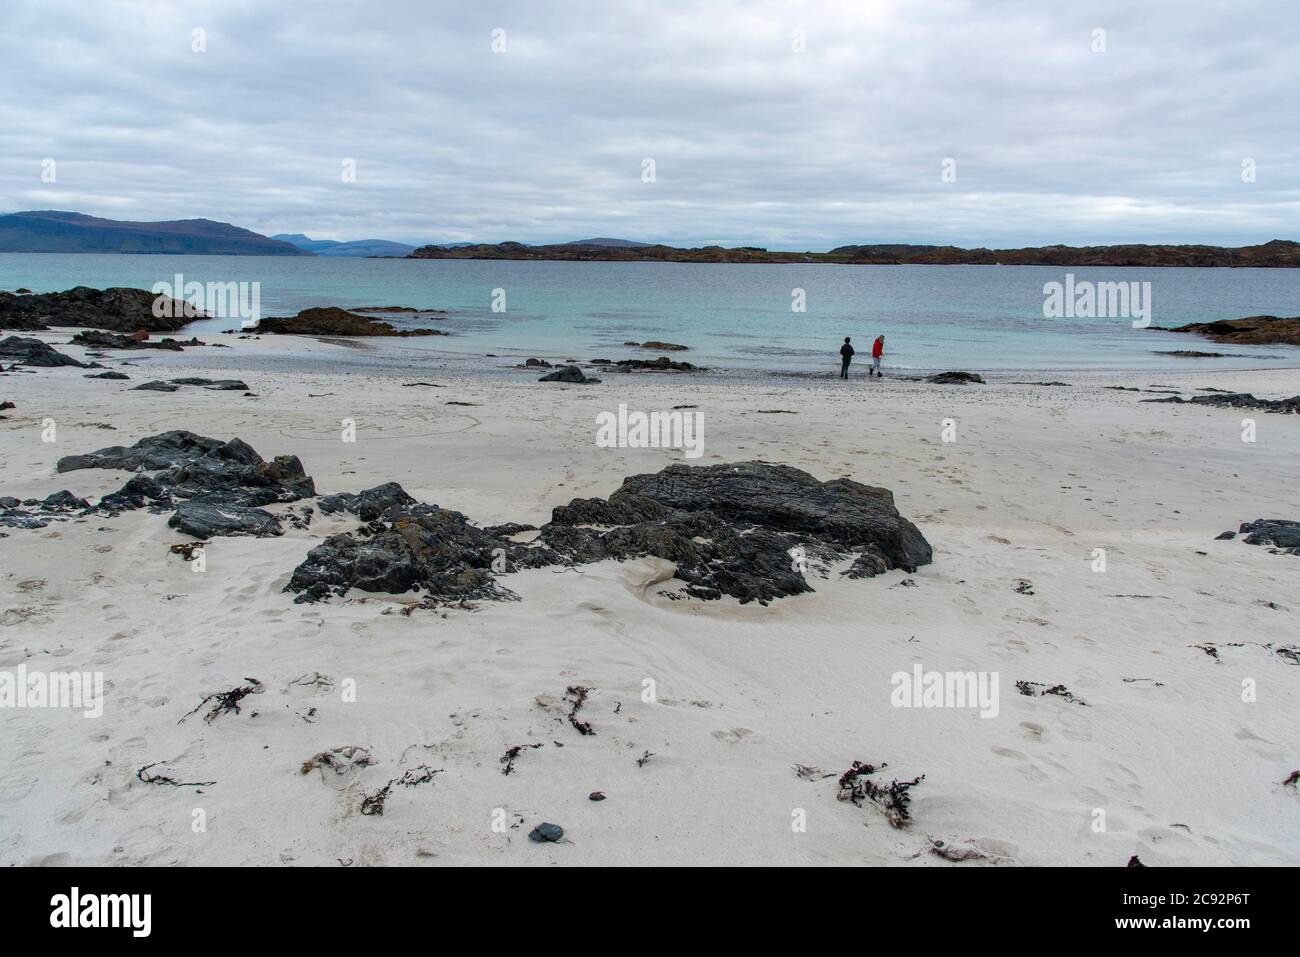 Beach on Iona, Inner Hebrides off the Ross of Mull, Argyll and Bute, Scotland, United Kingdom. Stock Photo